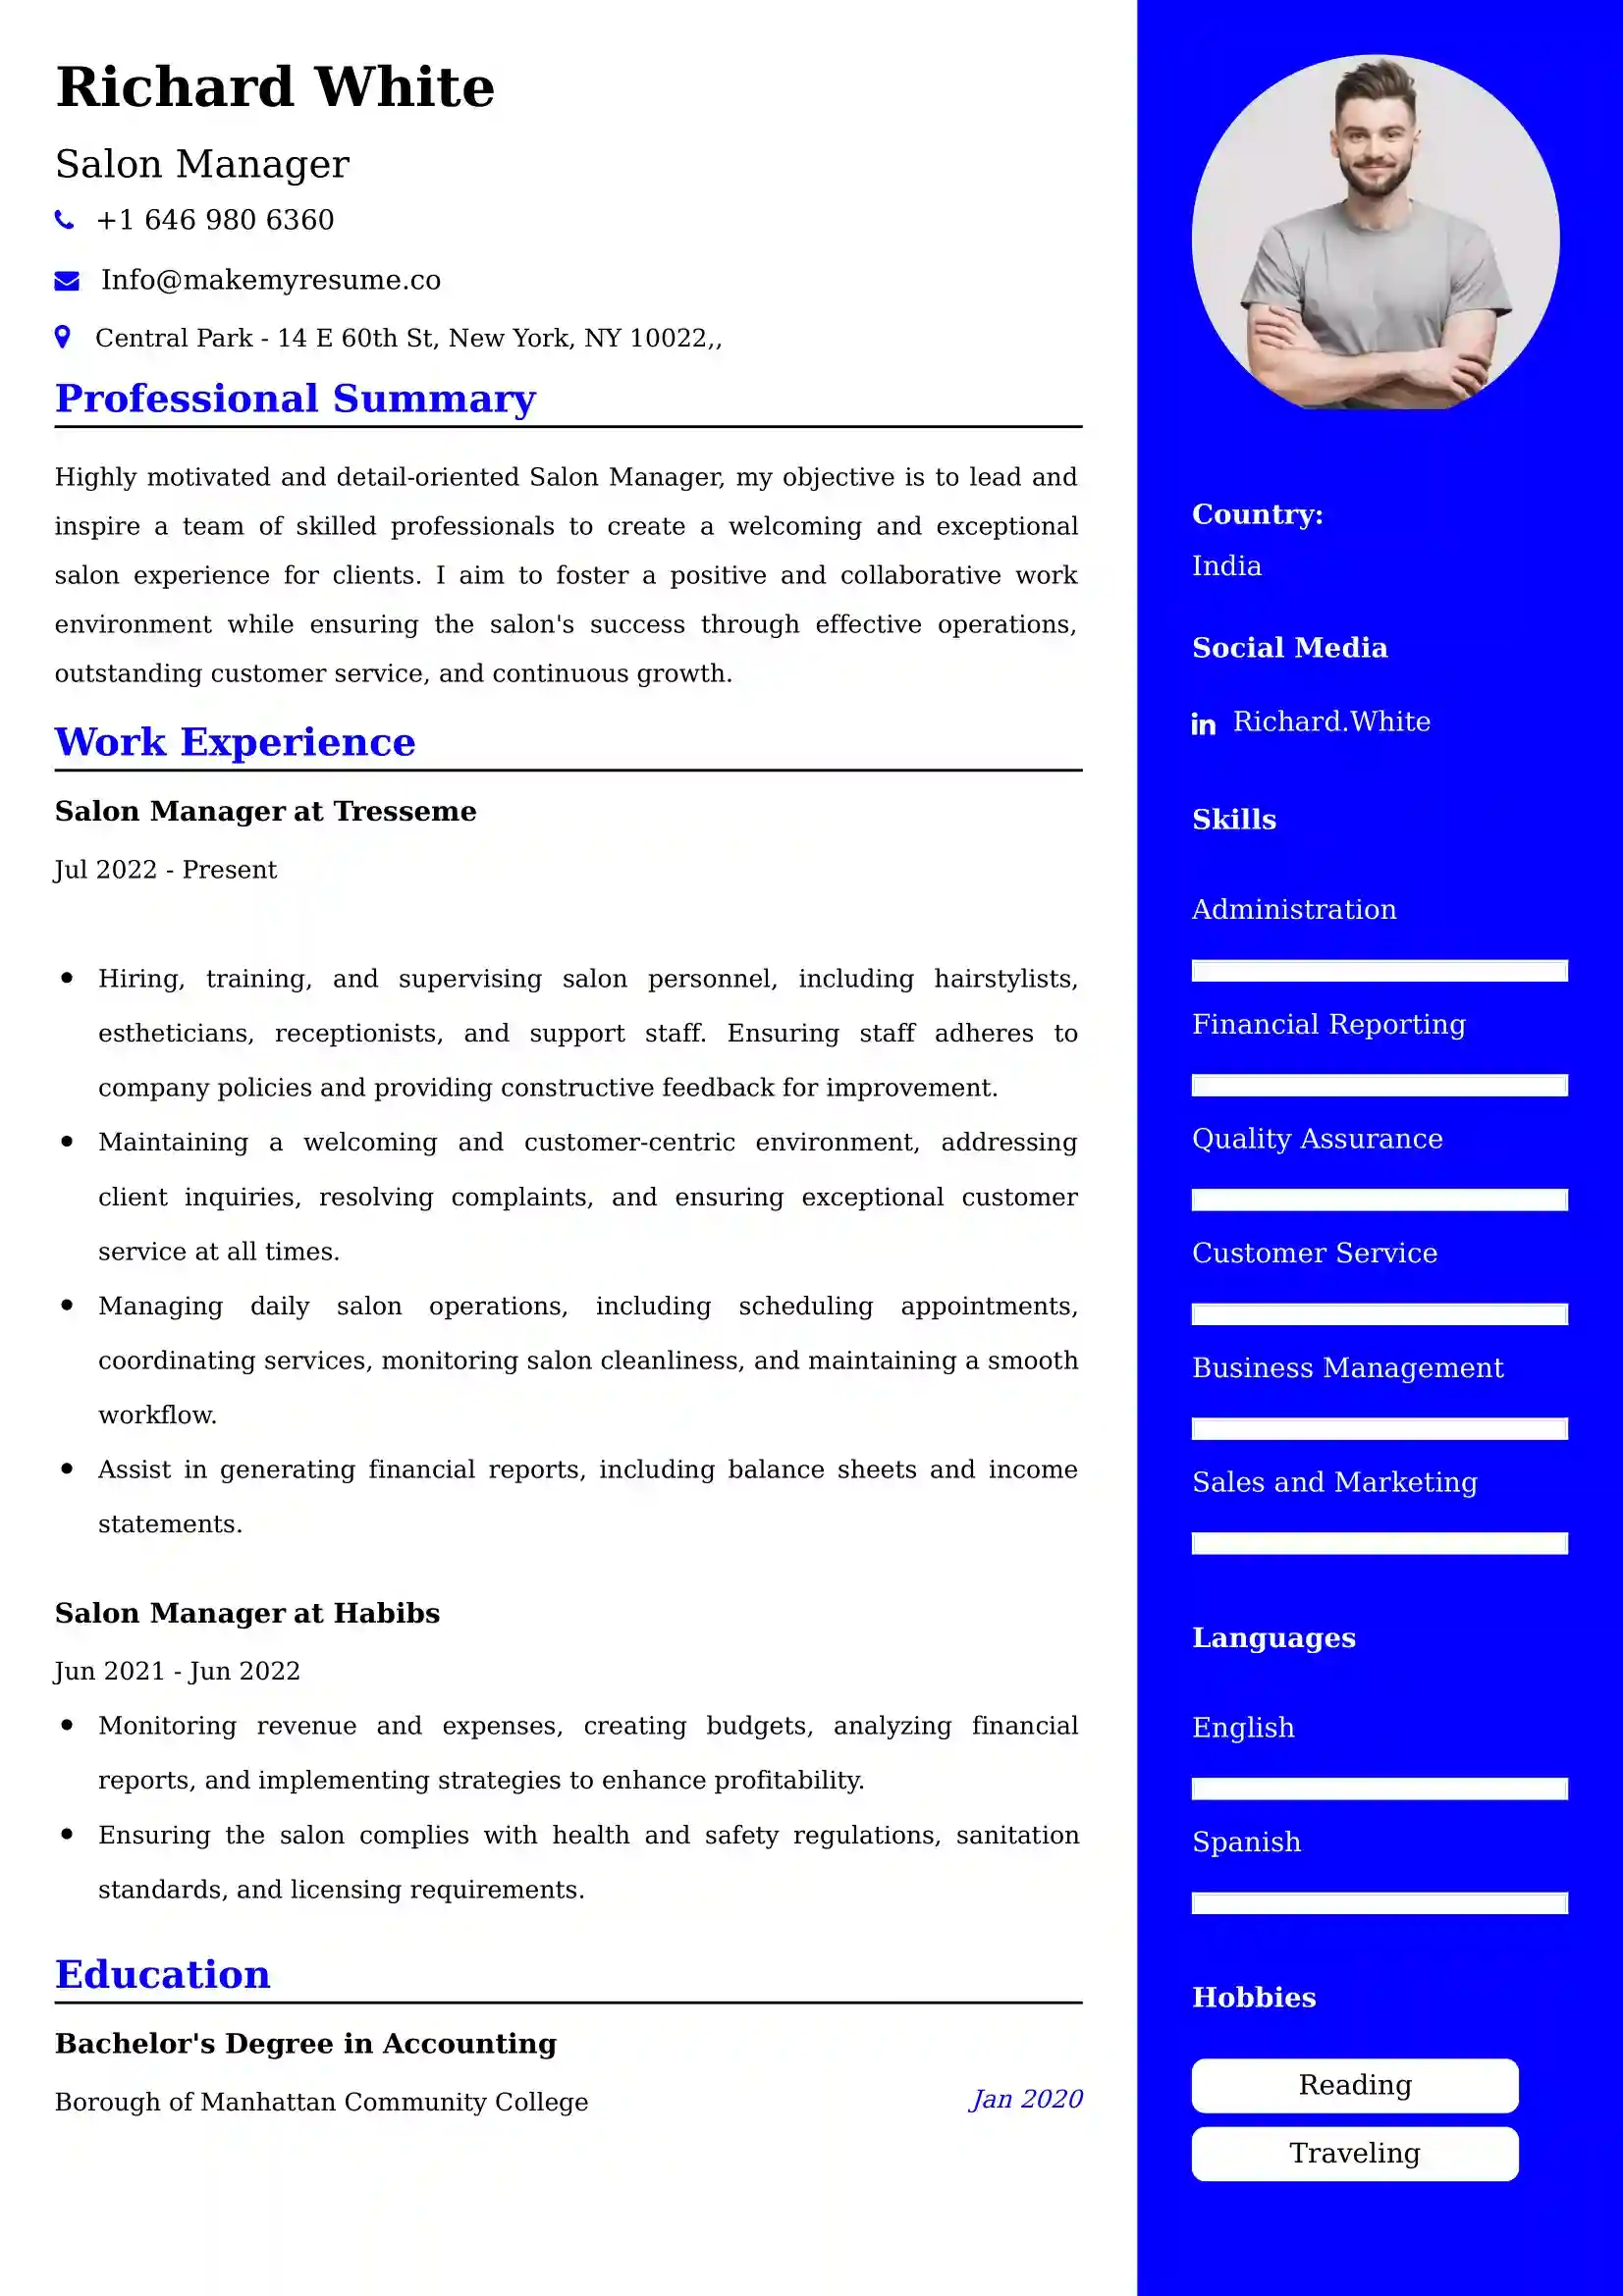 Salon Manager Resume Examples for UAE